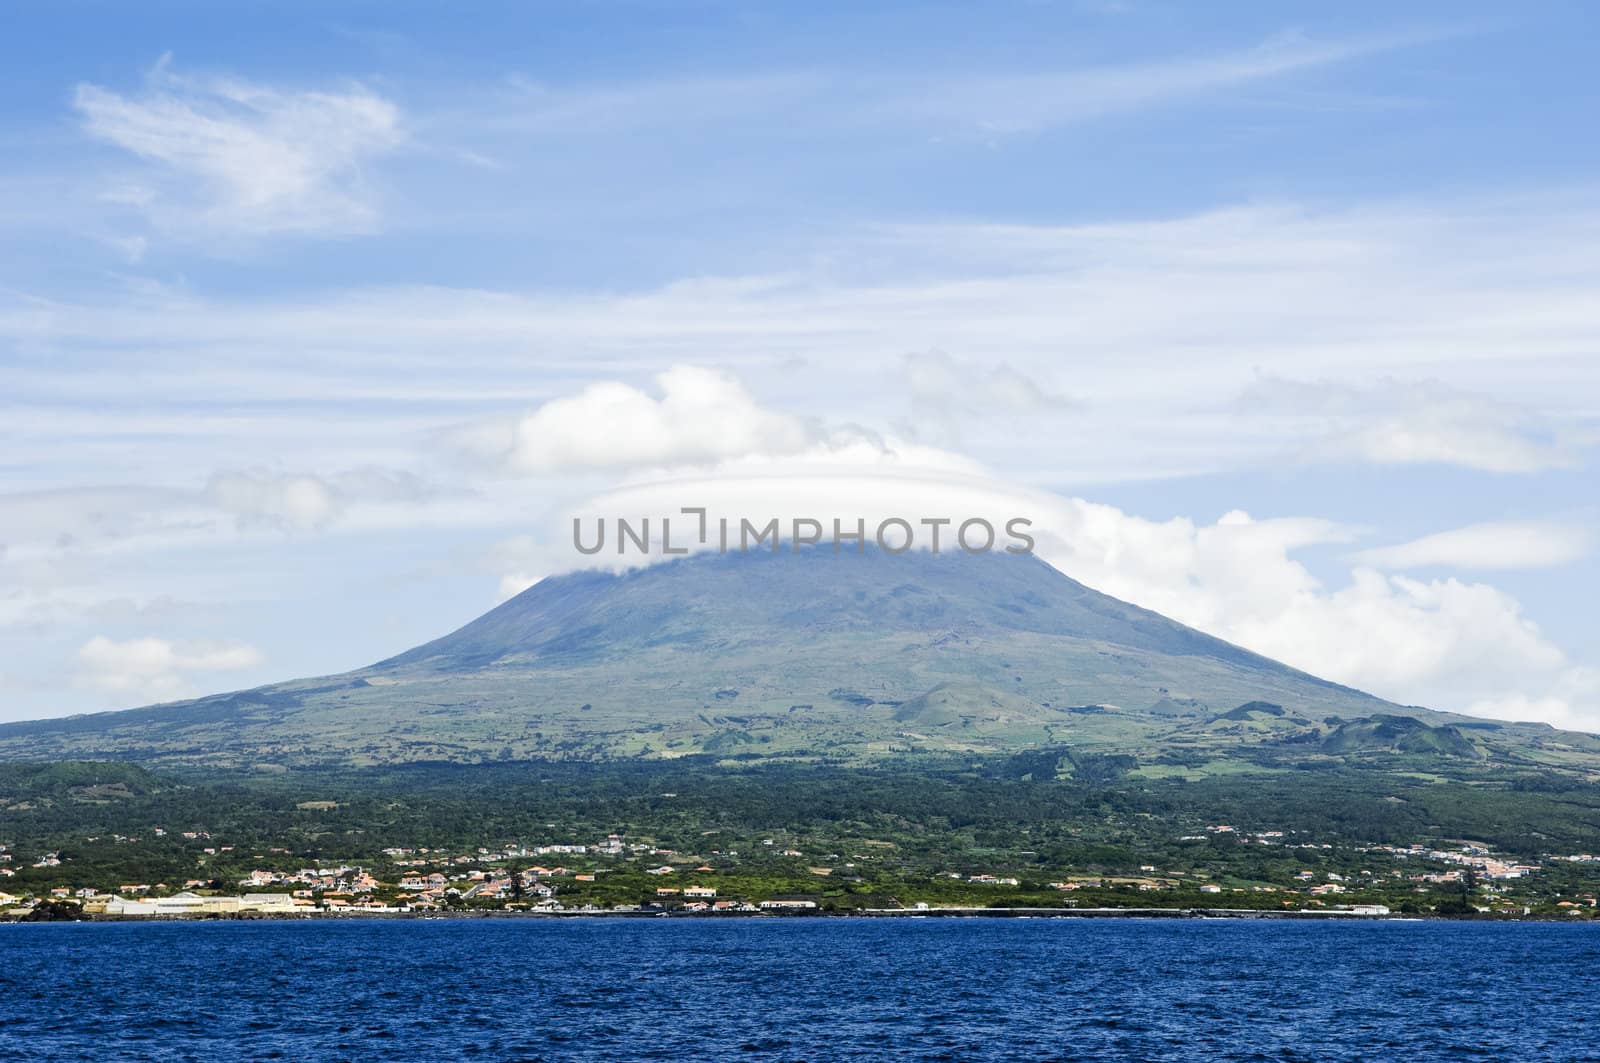 Pico Island viewed from the sea